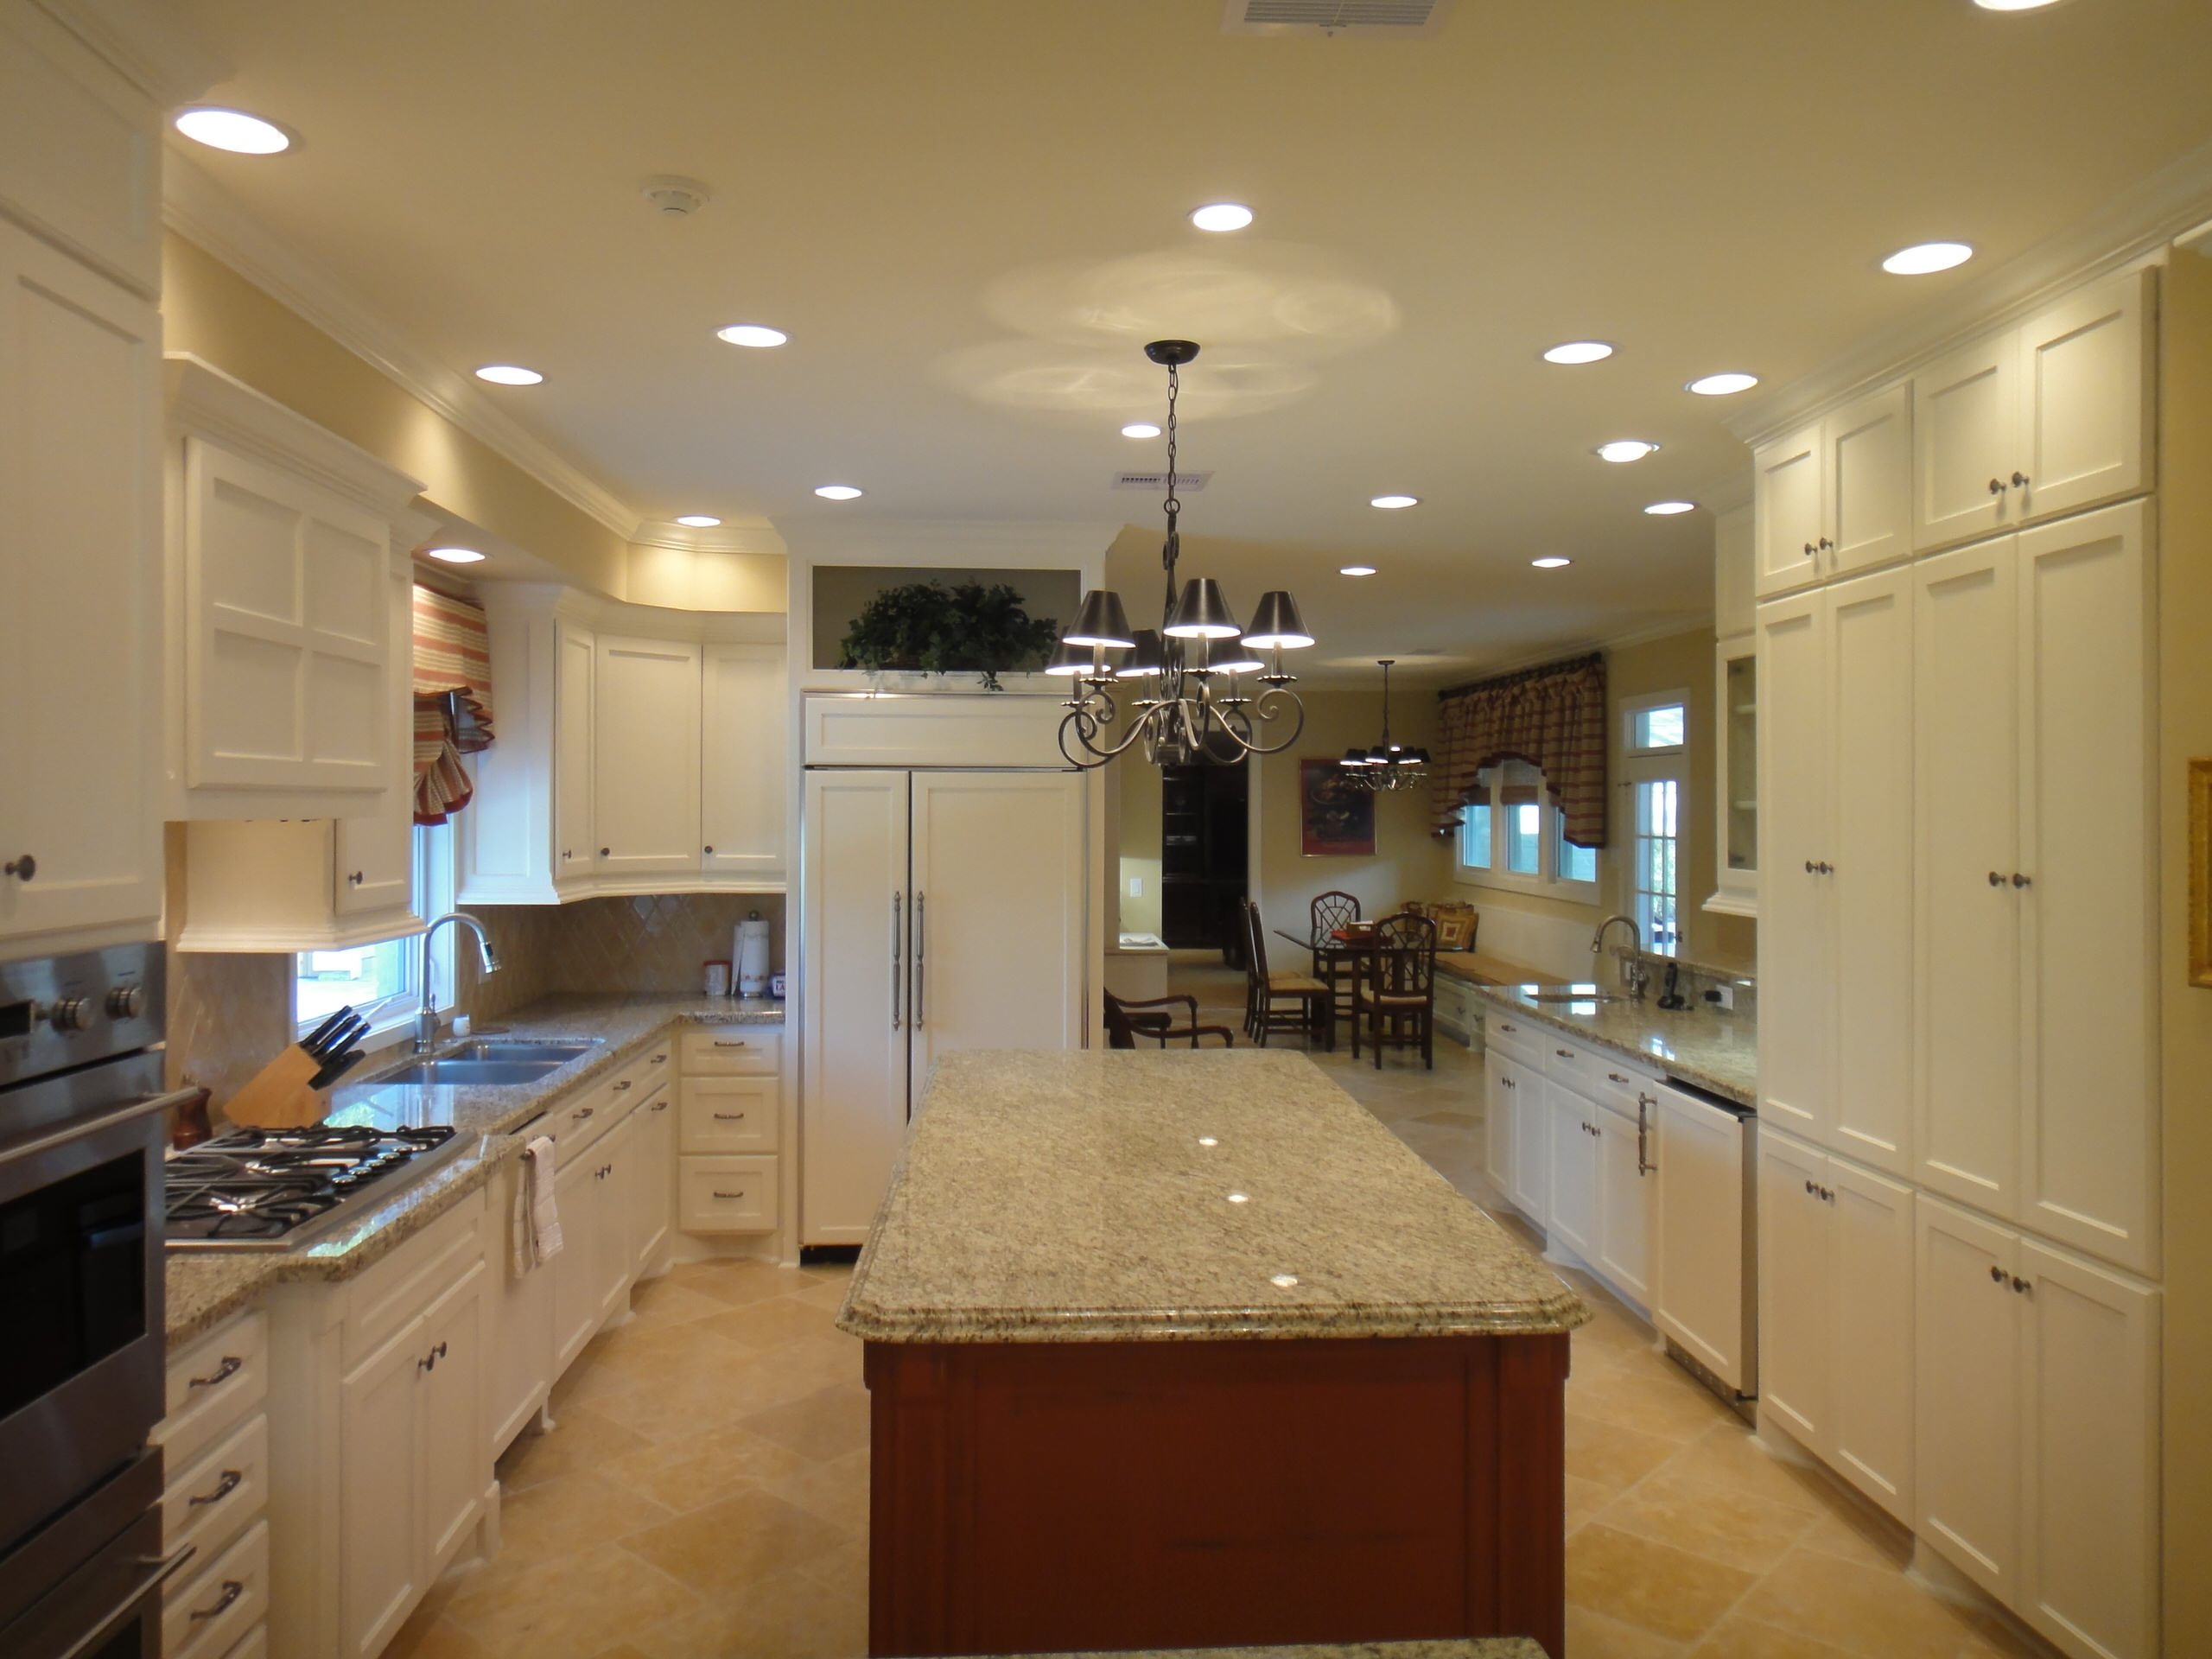 Remodeled Kitchen with added Breakfast Area with banquette